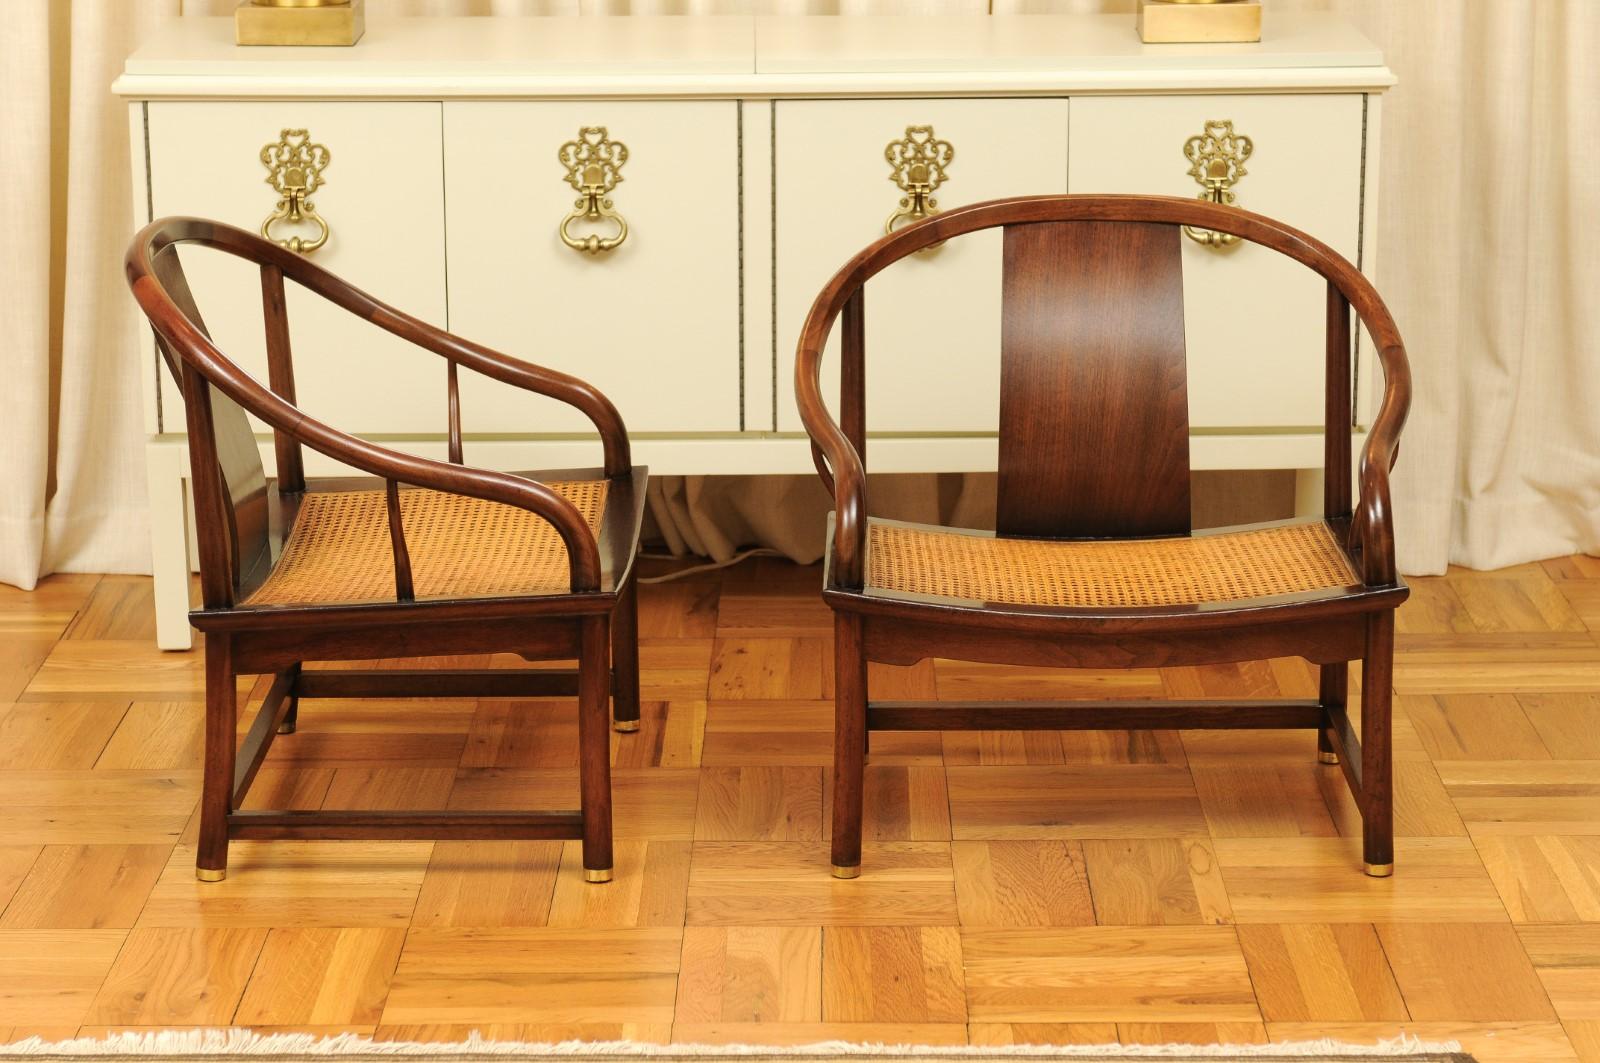 Stunning Restored Pair of Walnut Cane Loungers by Michael Taylor, circa 1960 For Sale 4